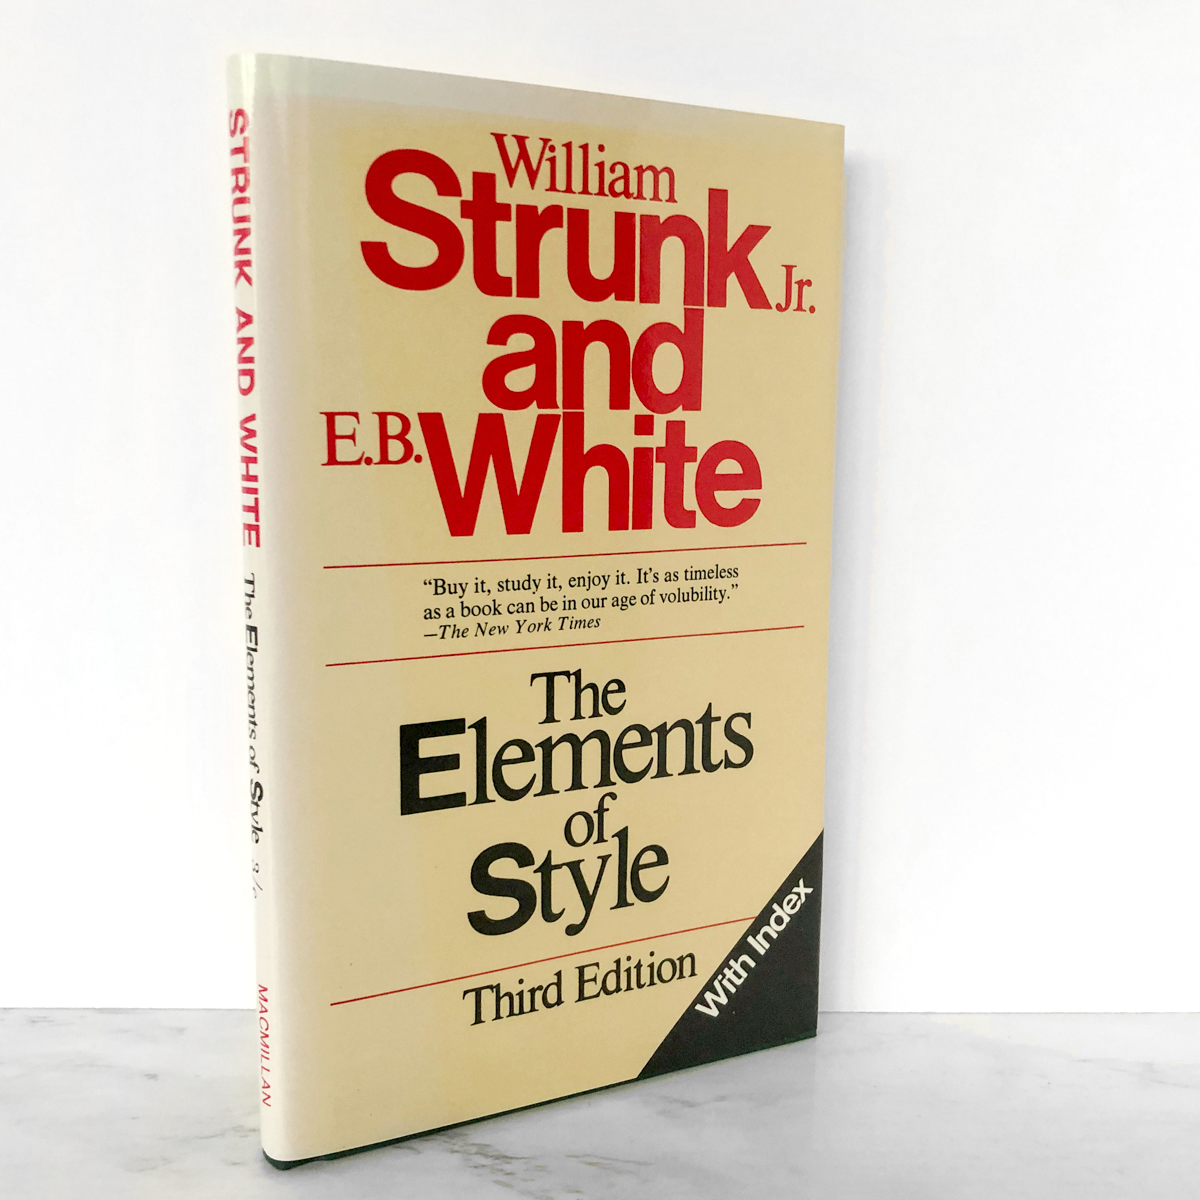 The Elements of Style, Third Edition